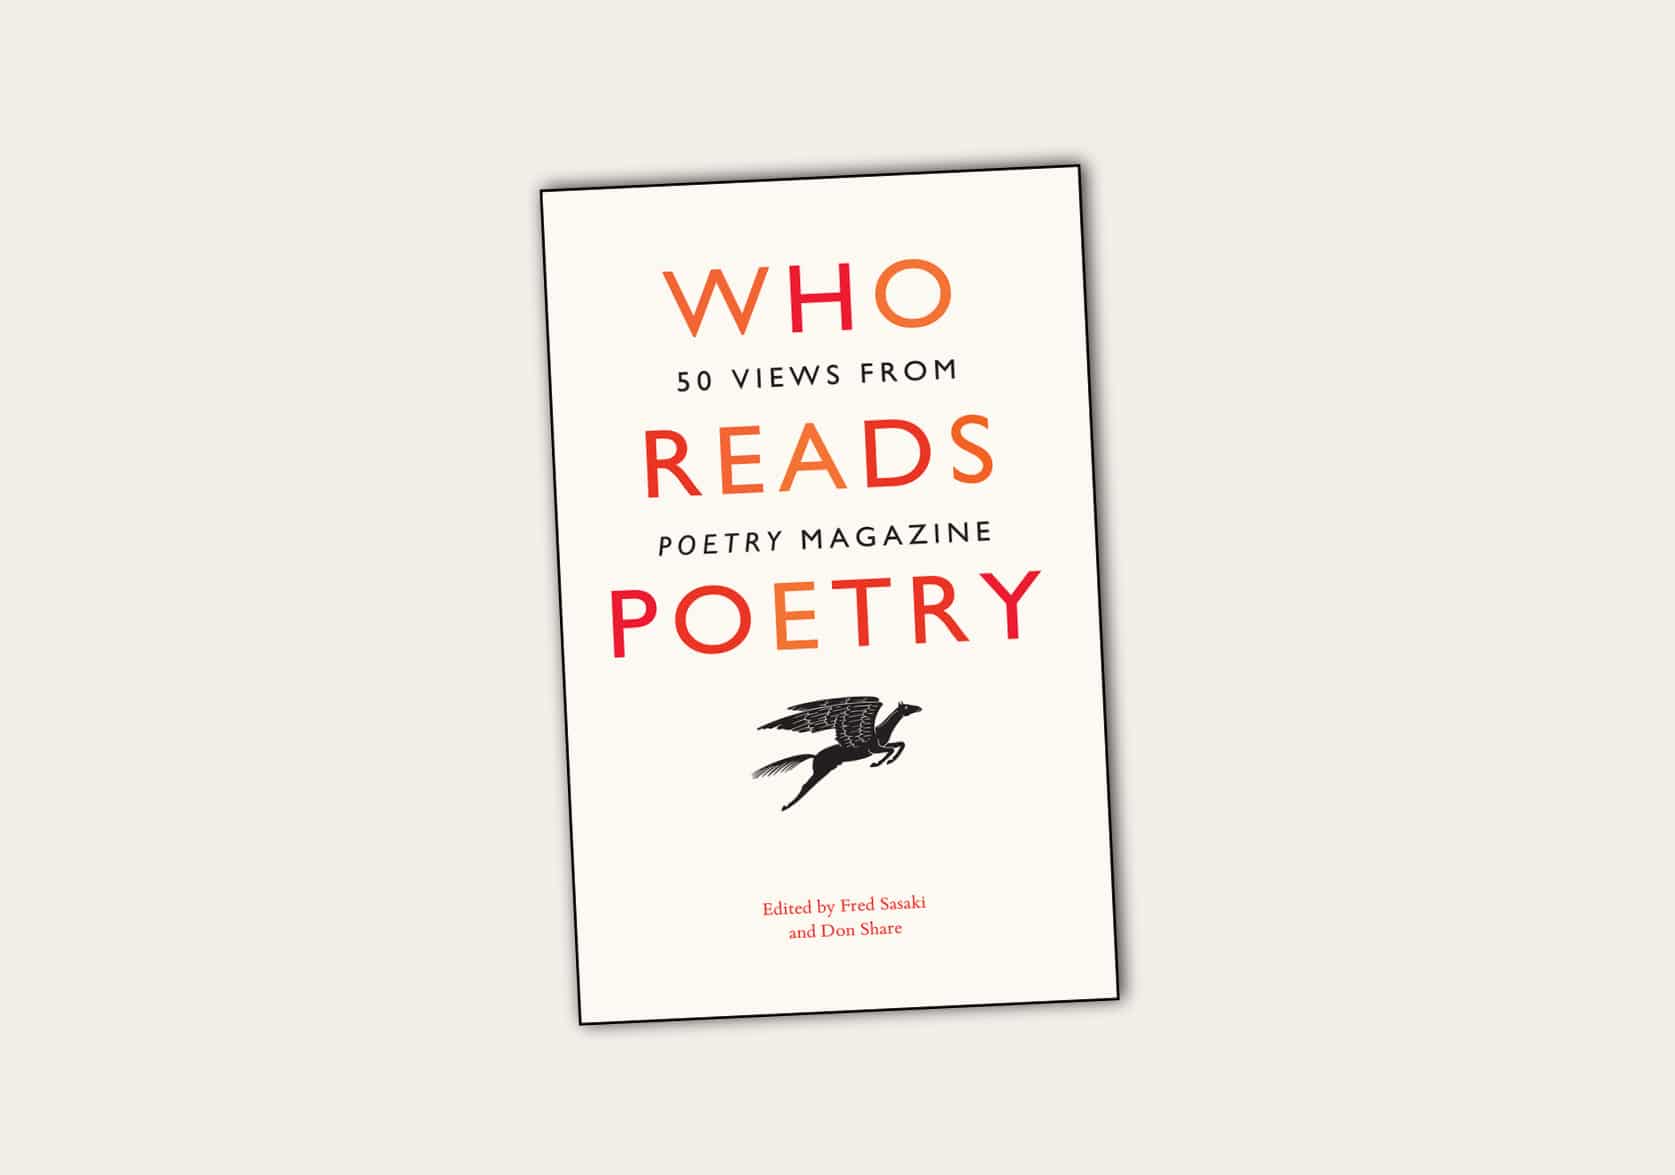 Who Reads Poetry: 50 Views from Poetry Magazine, edited by Fred Sasaki and Don Share